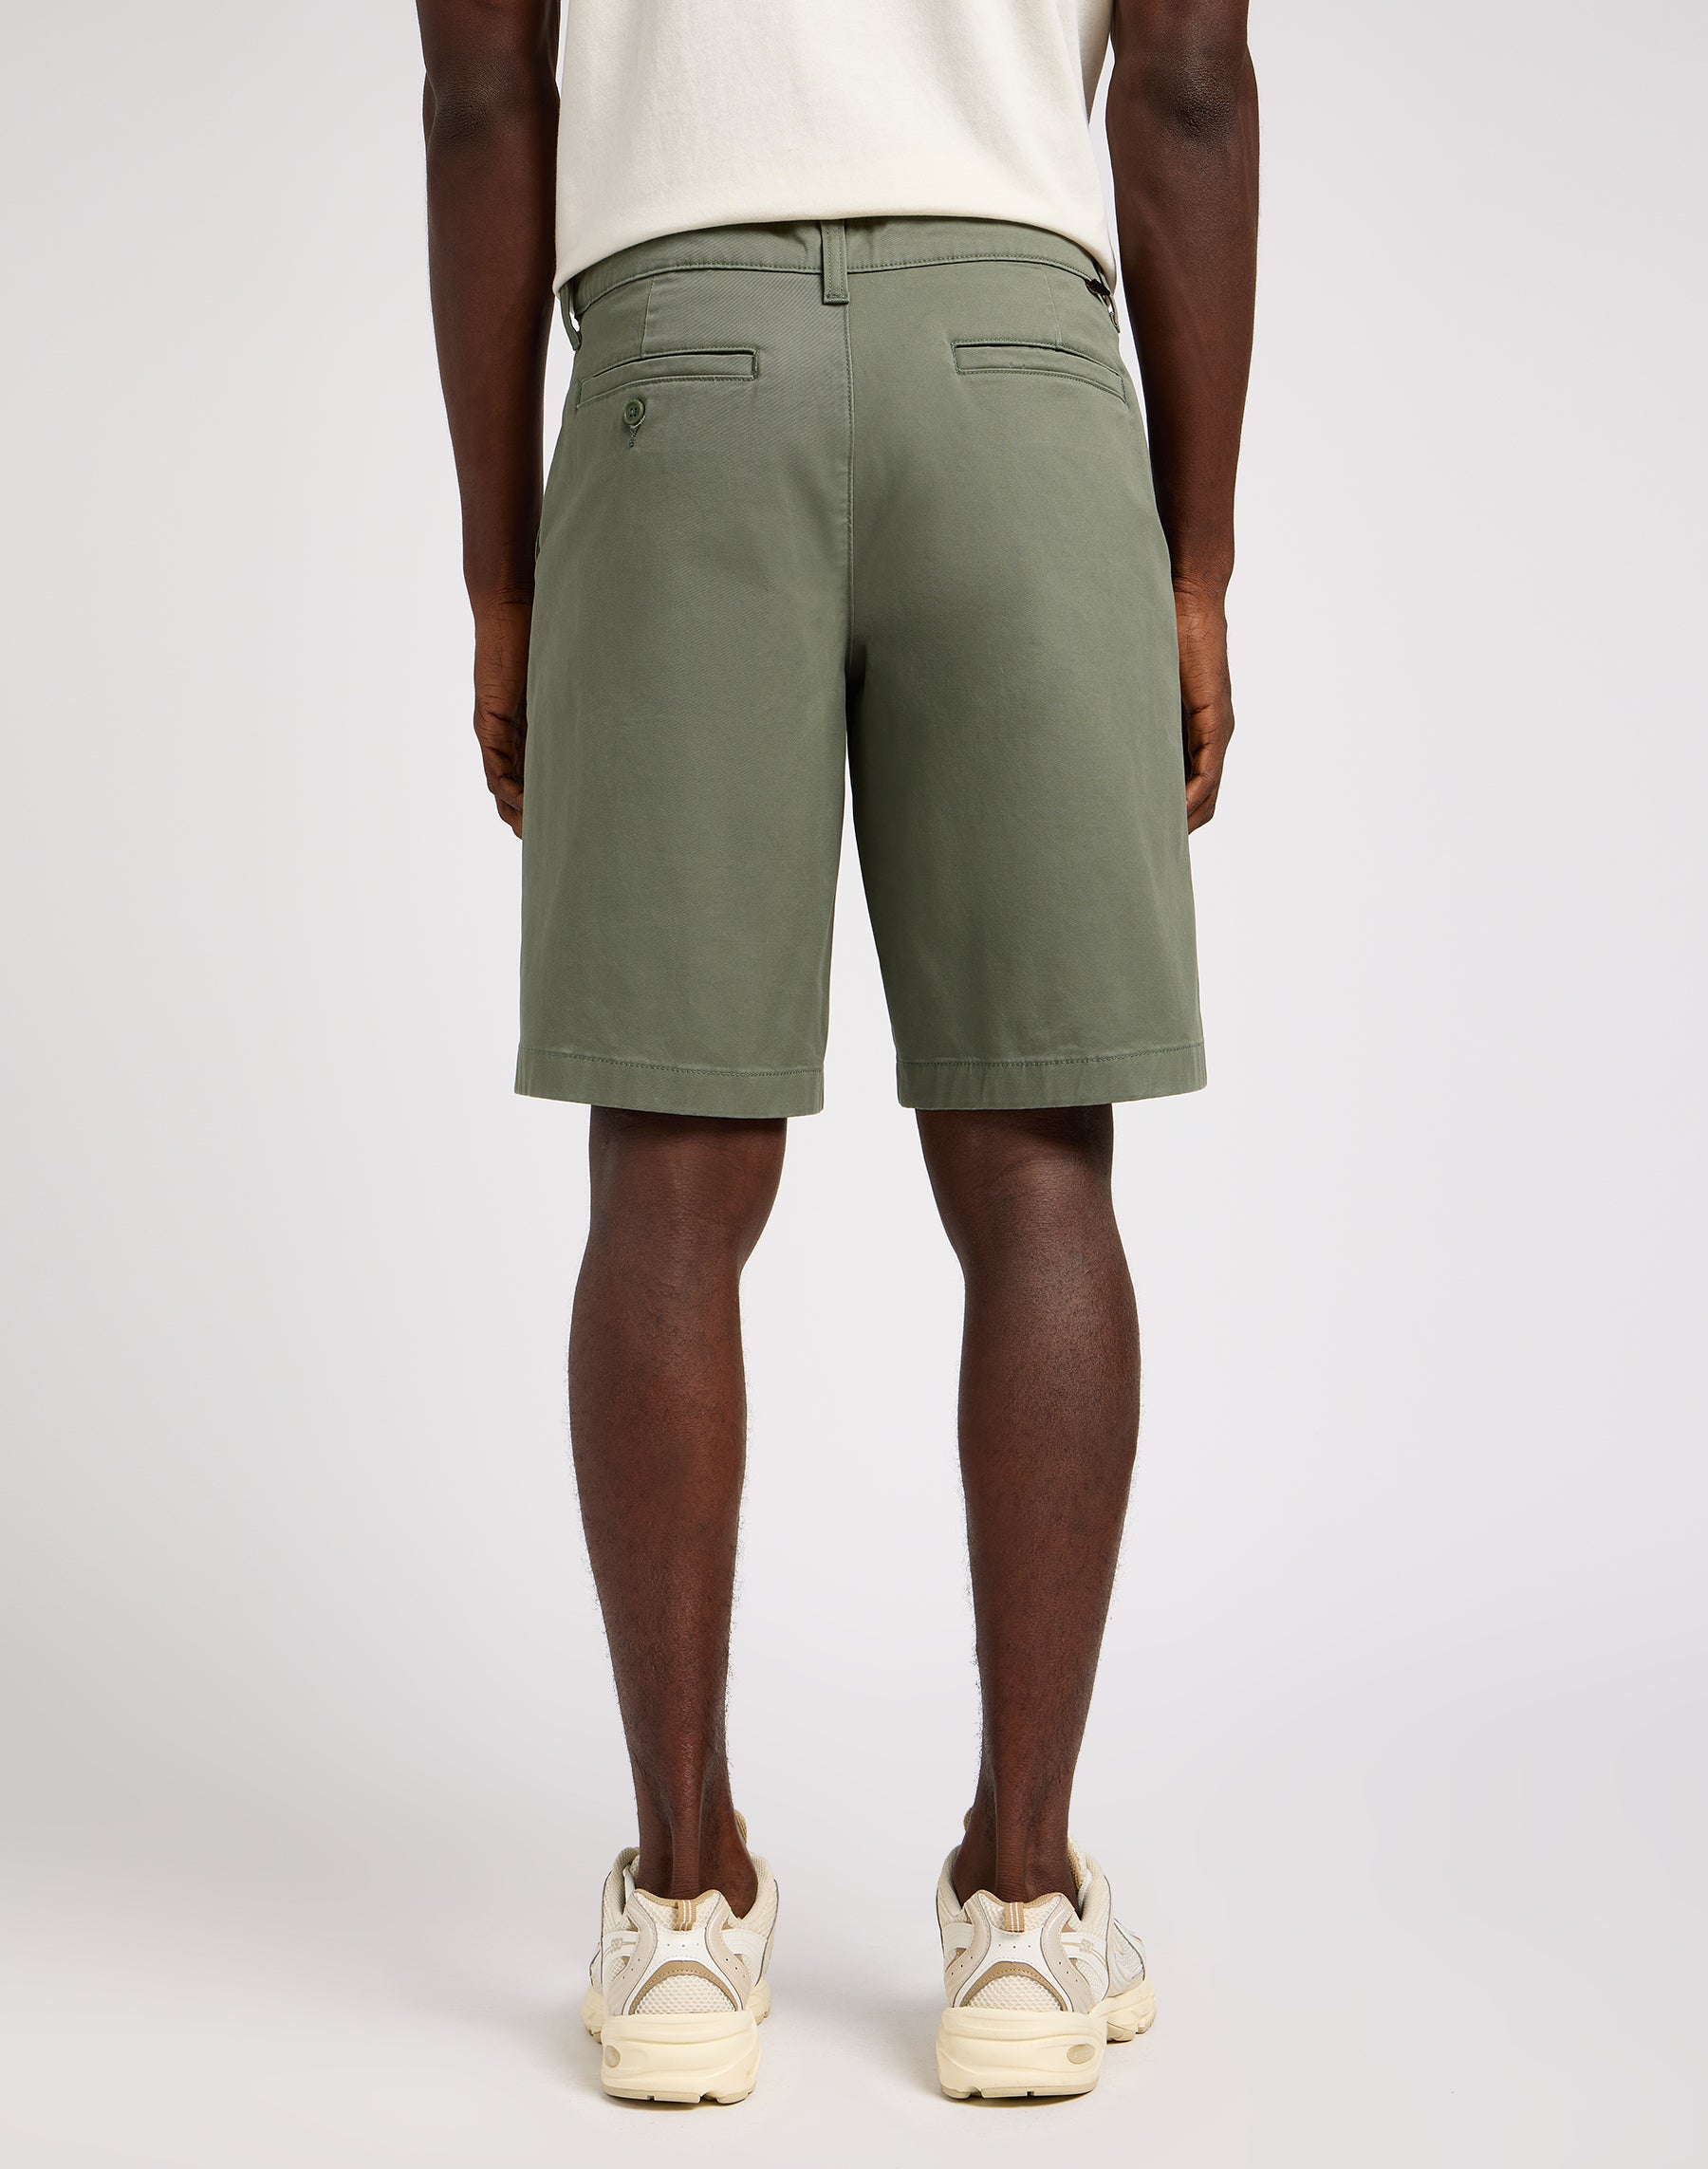 Relaxed Chino Short in Olive Grove Shorts Lee   